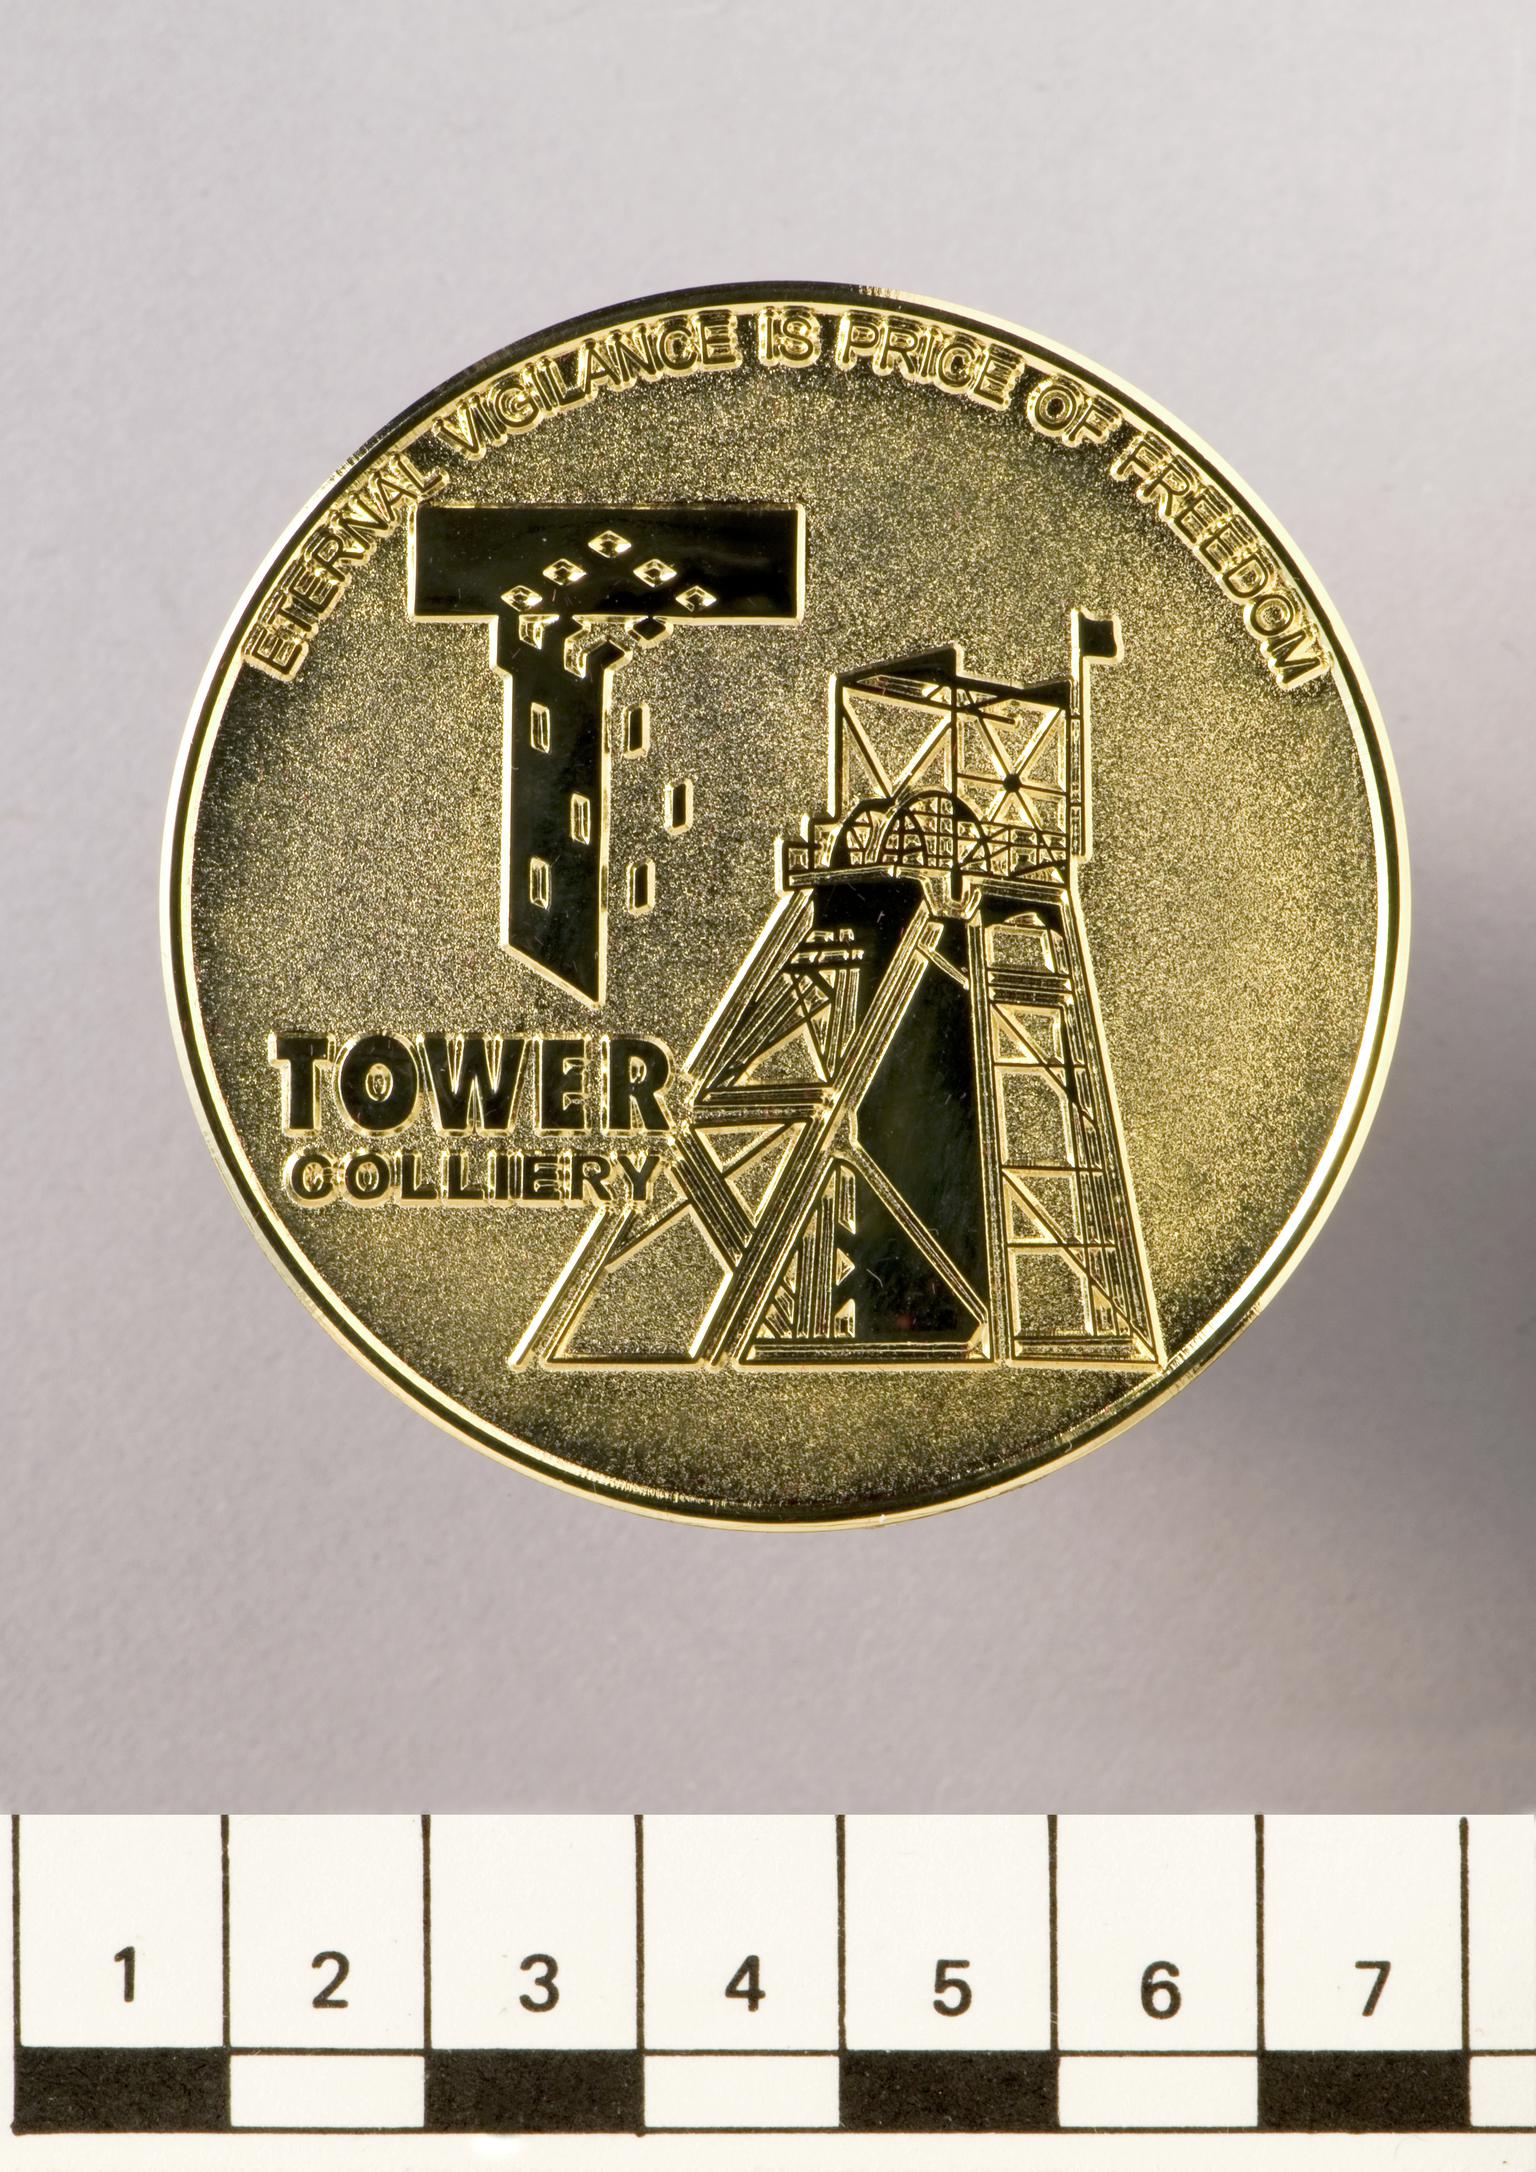 Tower Colliery closure commemorative medal 2008